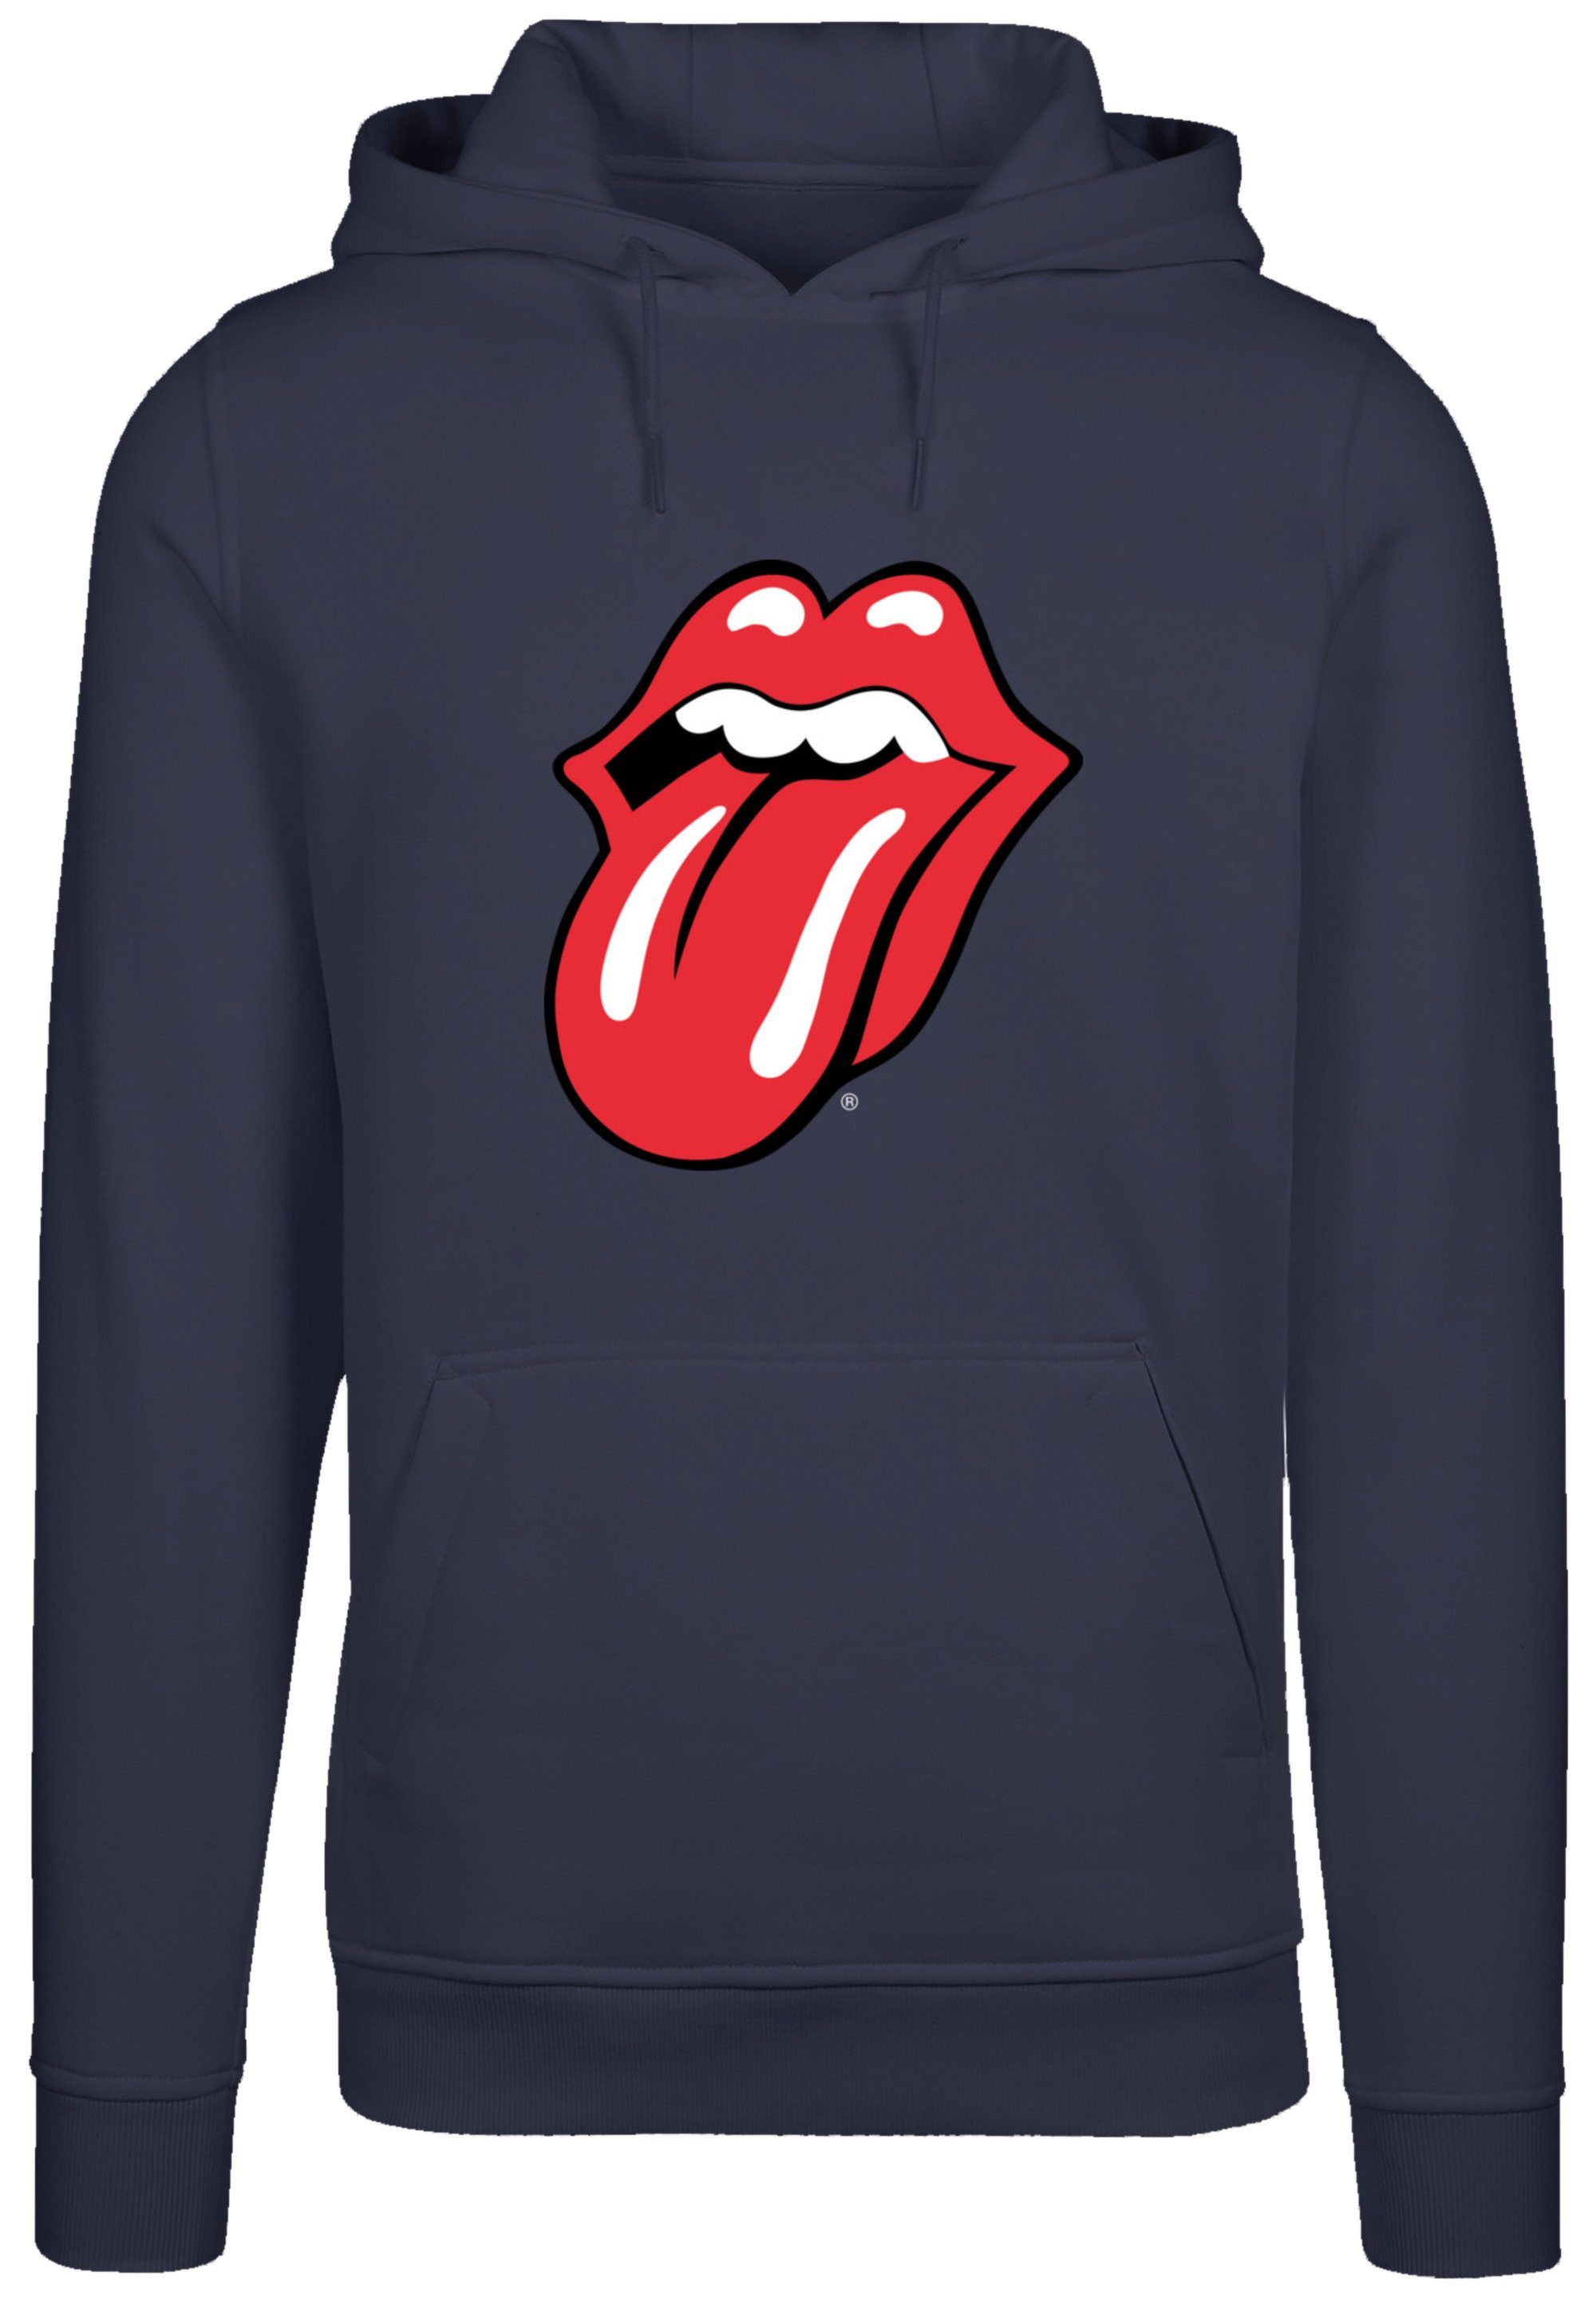 Musik Band Bequem Rolling Warm, Kapuzenpullover Classic F4NT4STIC Rock Hoodie, Zunge navy The Stones